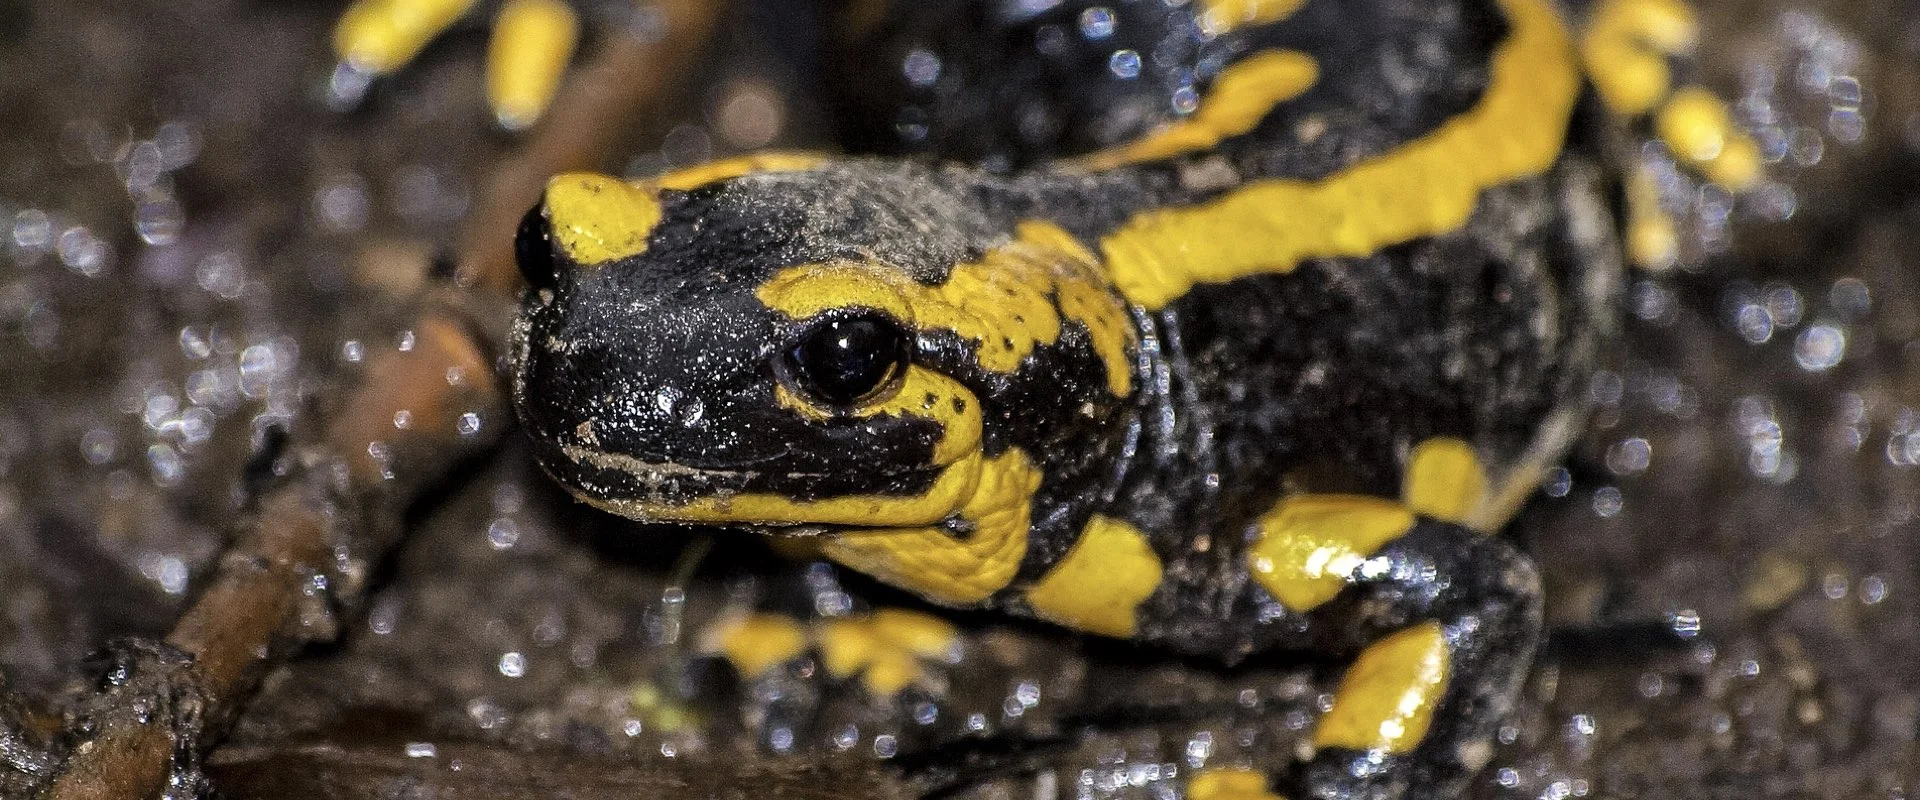 A fire salamander sitting on the ground with some dirt on its skin